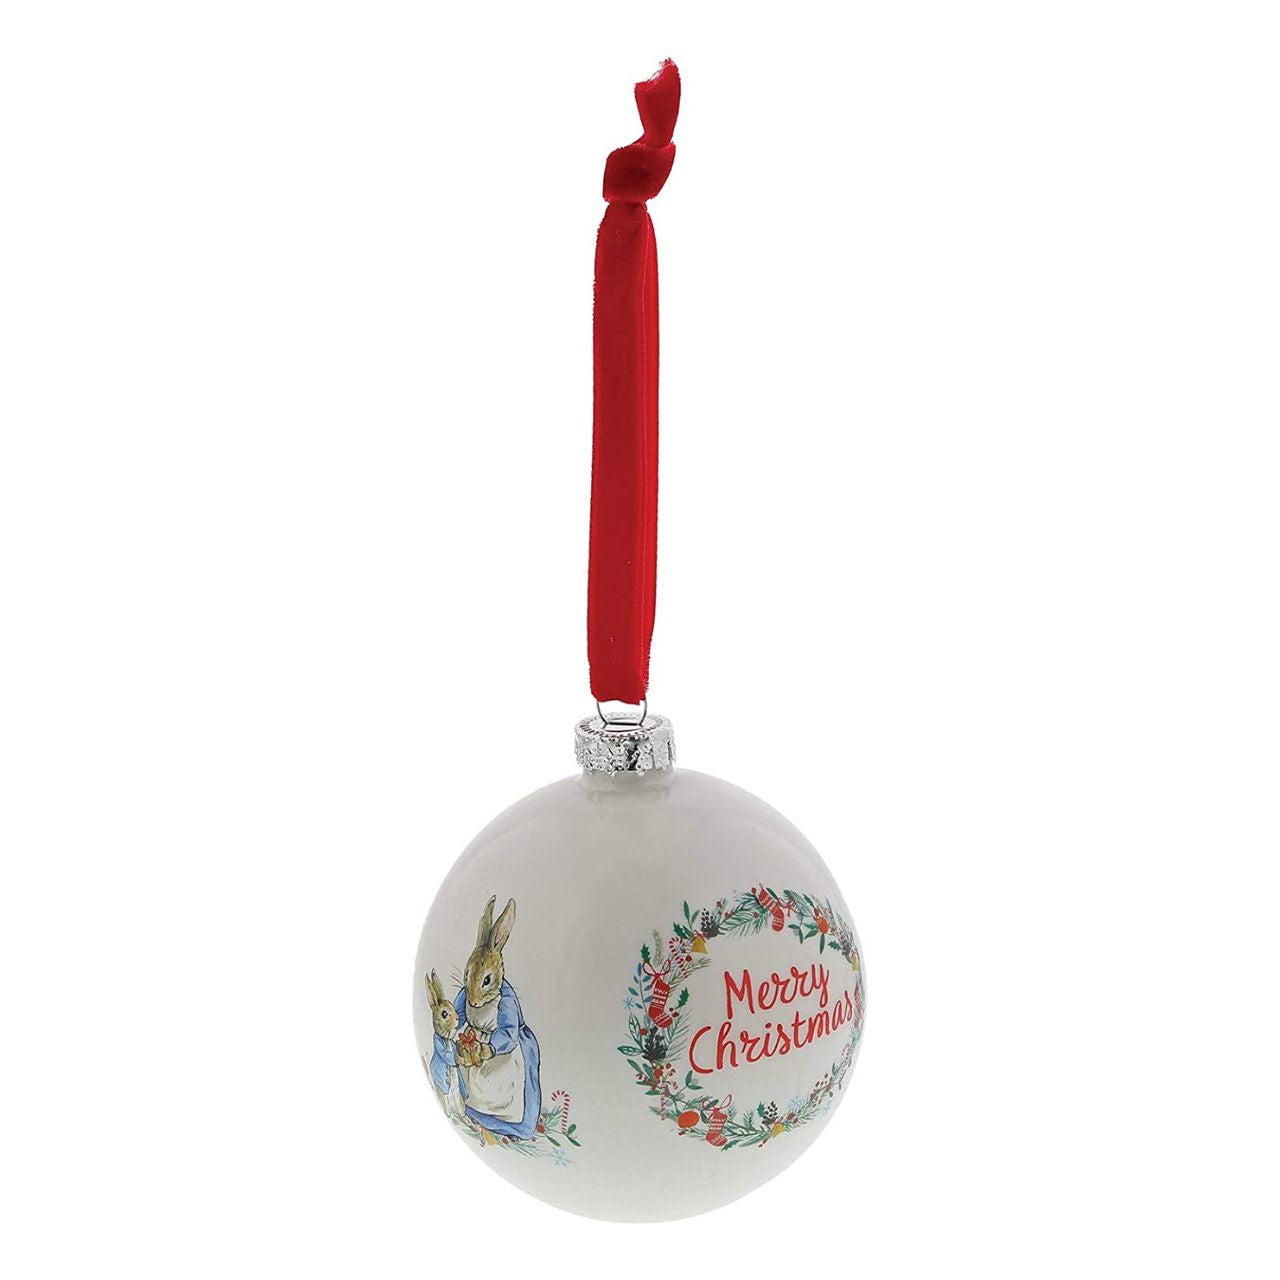 Beatrix Potter Peter Rabbit Christmas Bauble  A beautiful glass Peter Rabbit Bauble that makes a treasured keepsake all year round. The artwork for each product is taken from the original illustrations from the Beatrix Potter stories, helping bring each character to life. Presented in a branded gift box.